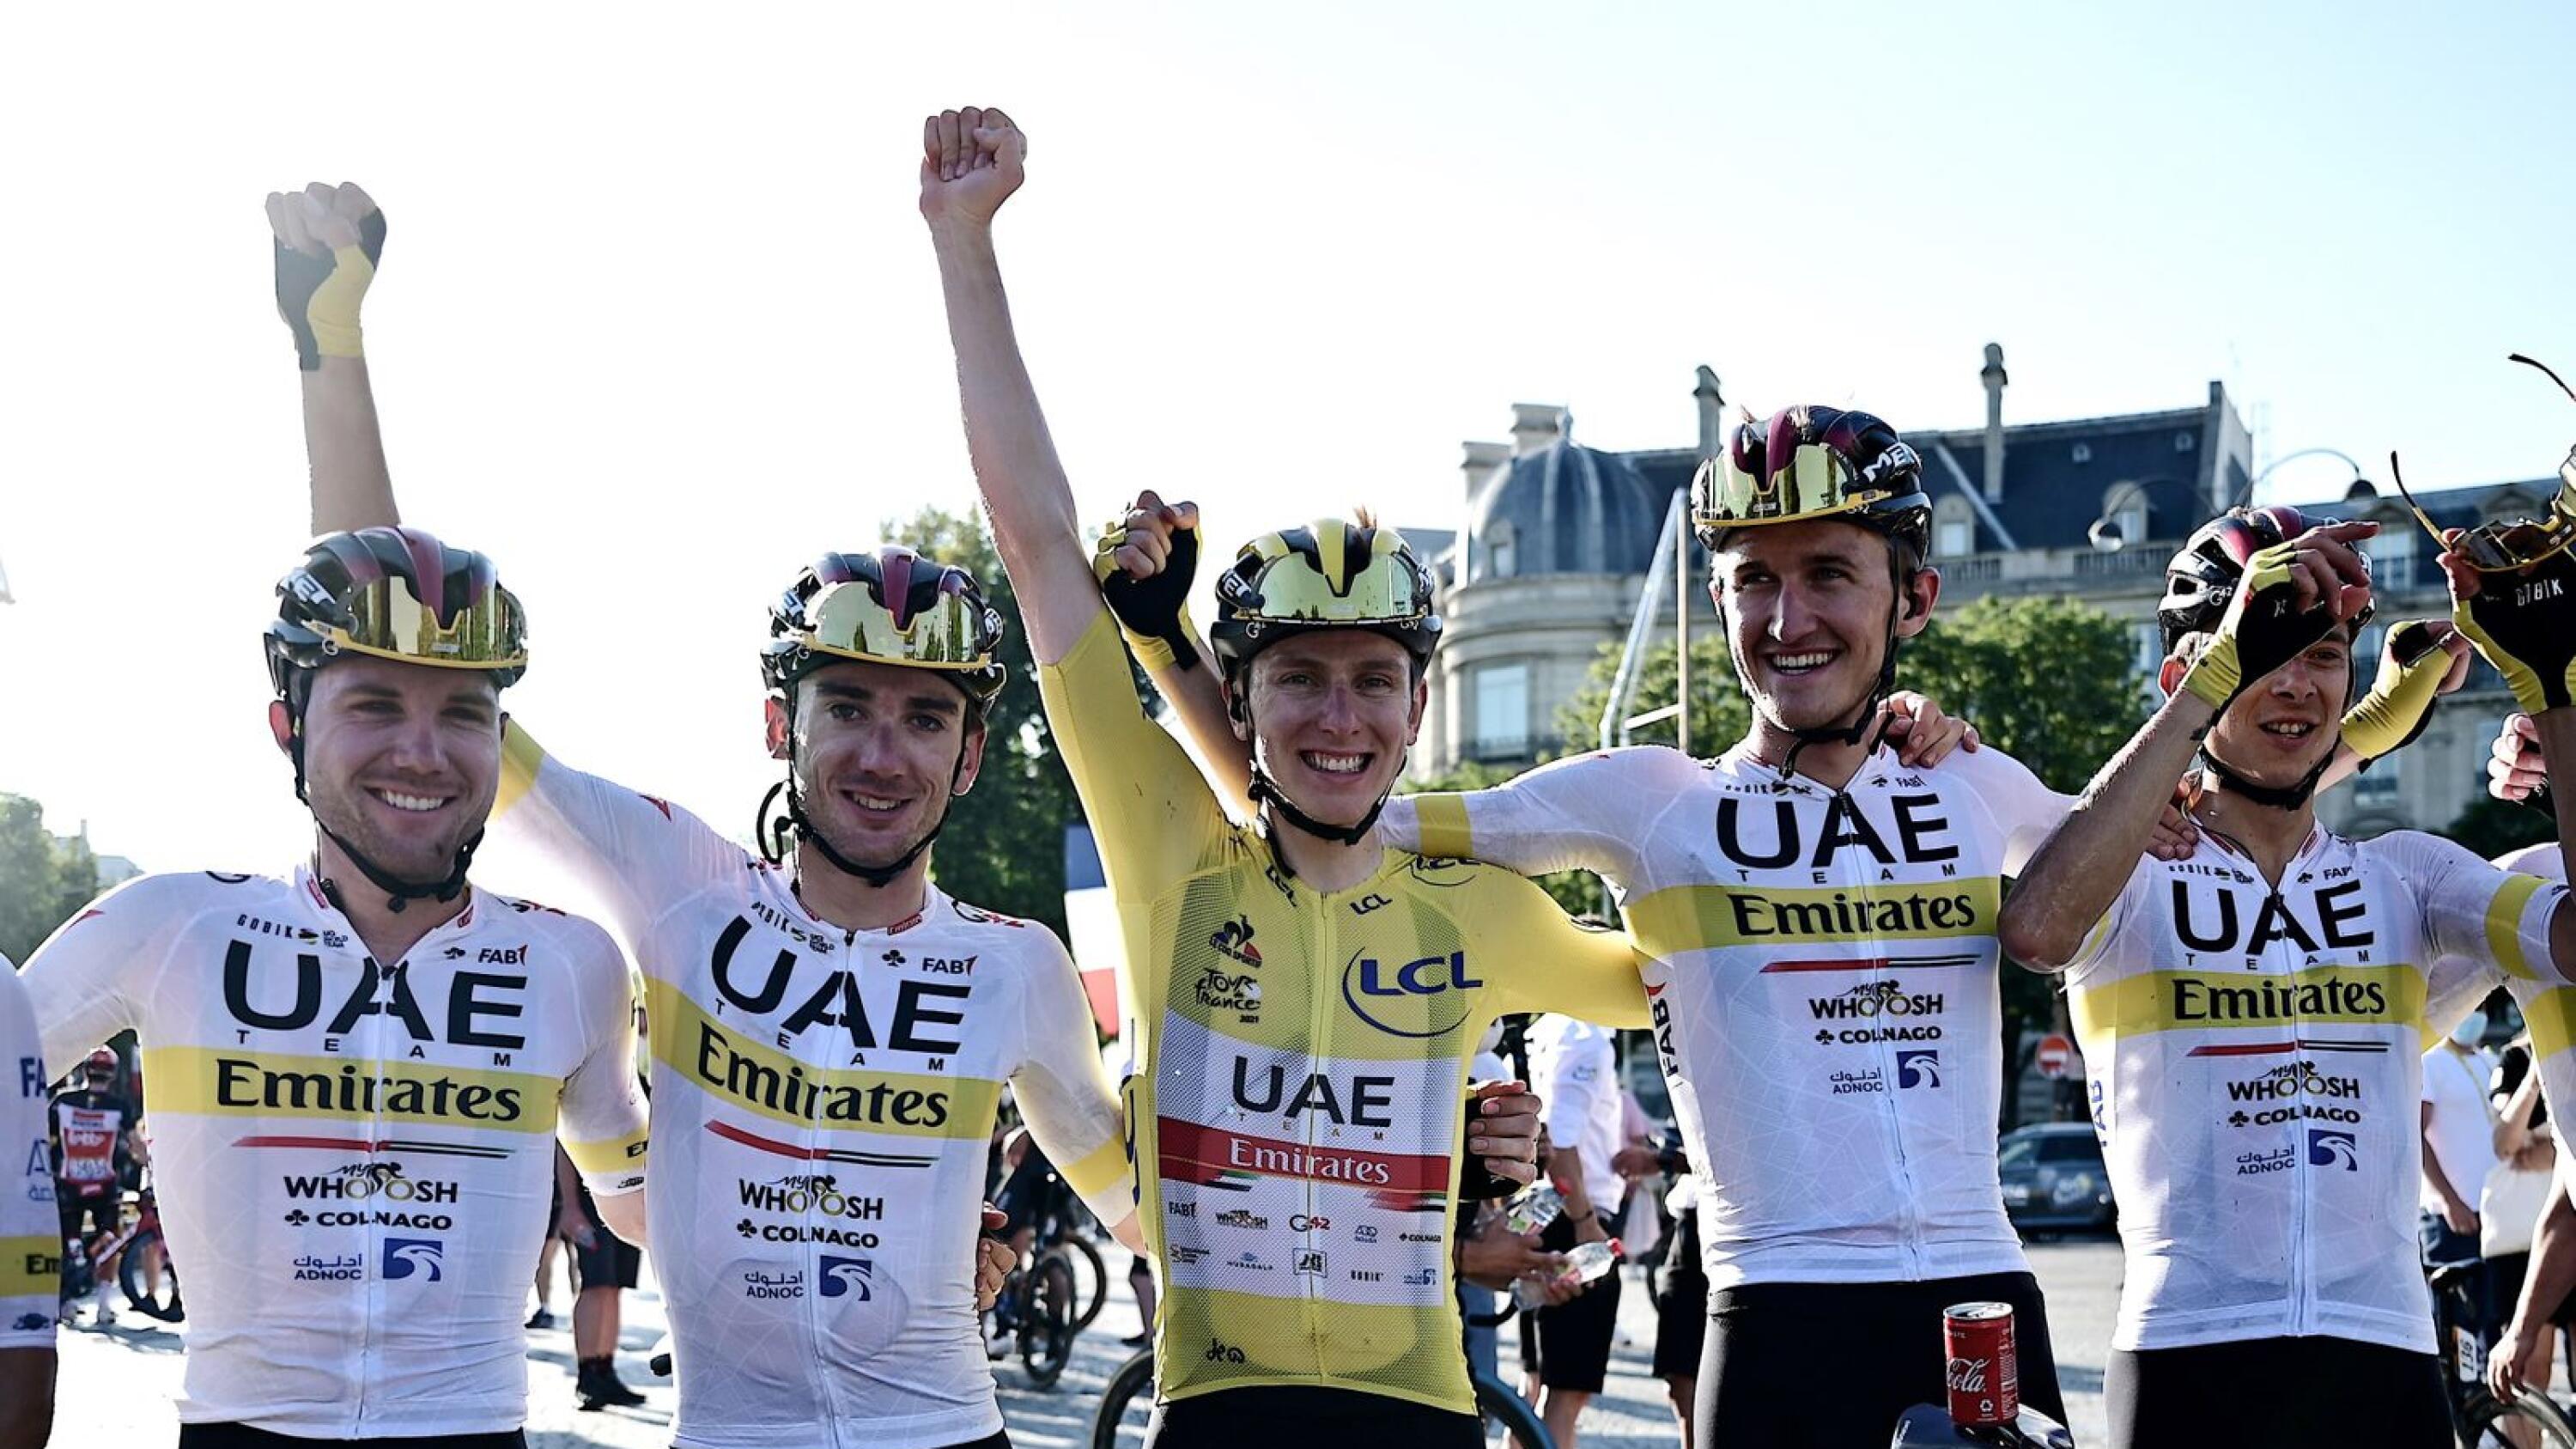 UAE Team Emirates rider Tadej Pogacar of Slovenia wearing the yellow jersey celebrates with his teammates after winning the Tour de France